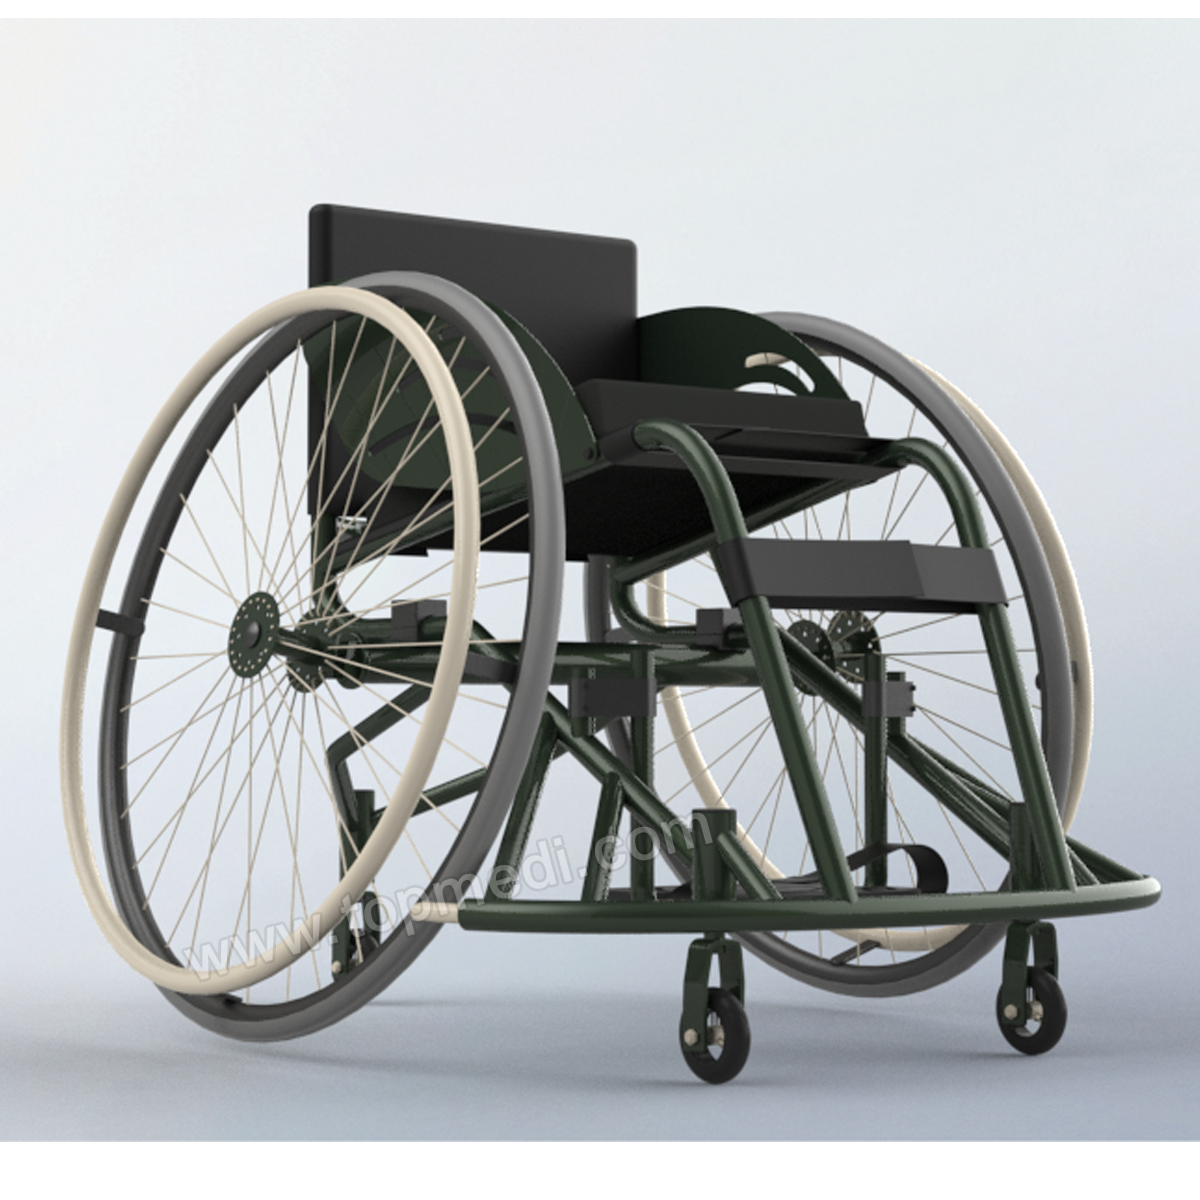 About Sports Wheelchairs